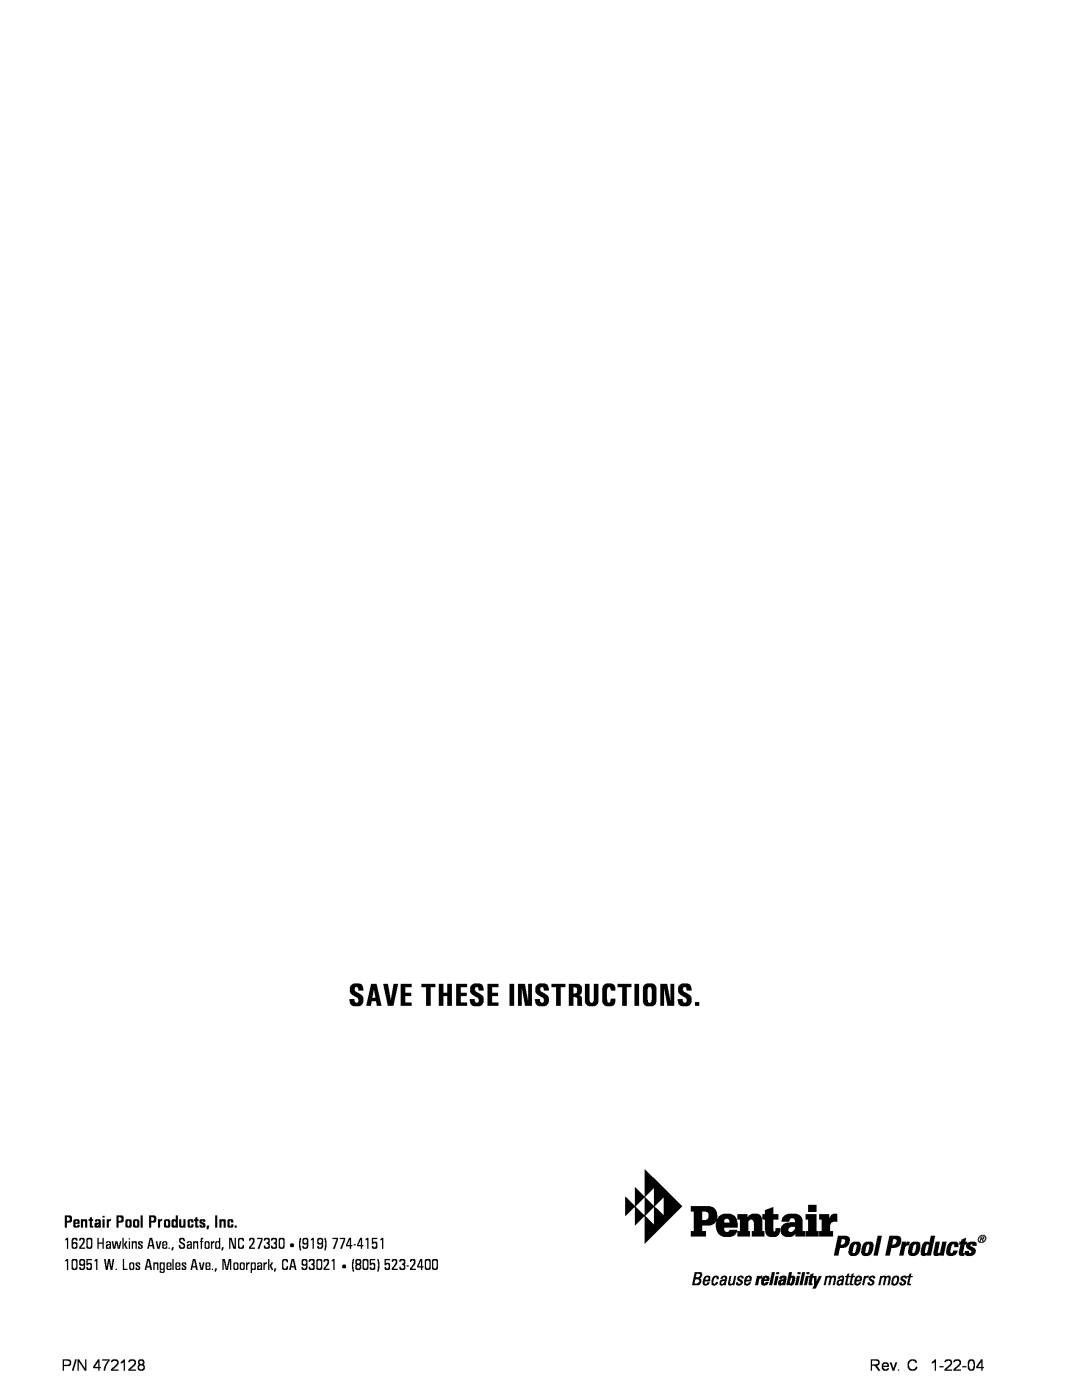 Pentair CH installation manual Save These Instructions, Pentair Pool Products, Inc, Hawkins Ave., Sanford, NC, Rev. C 